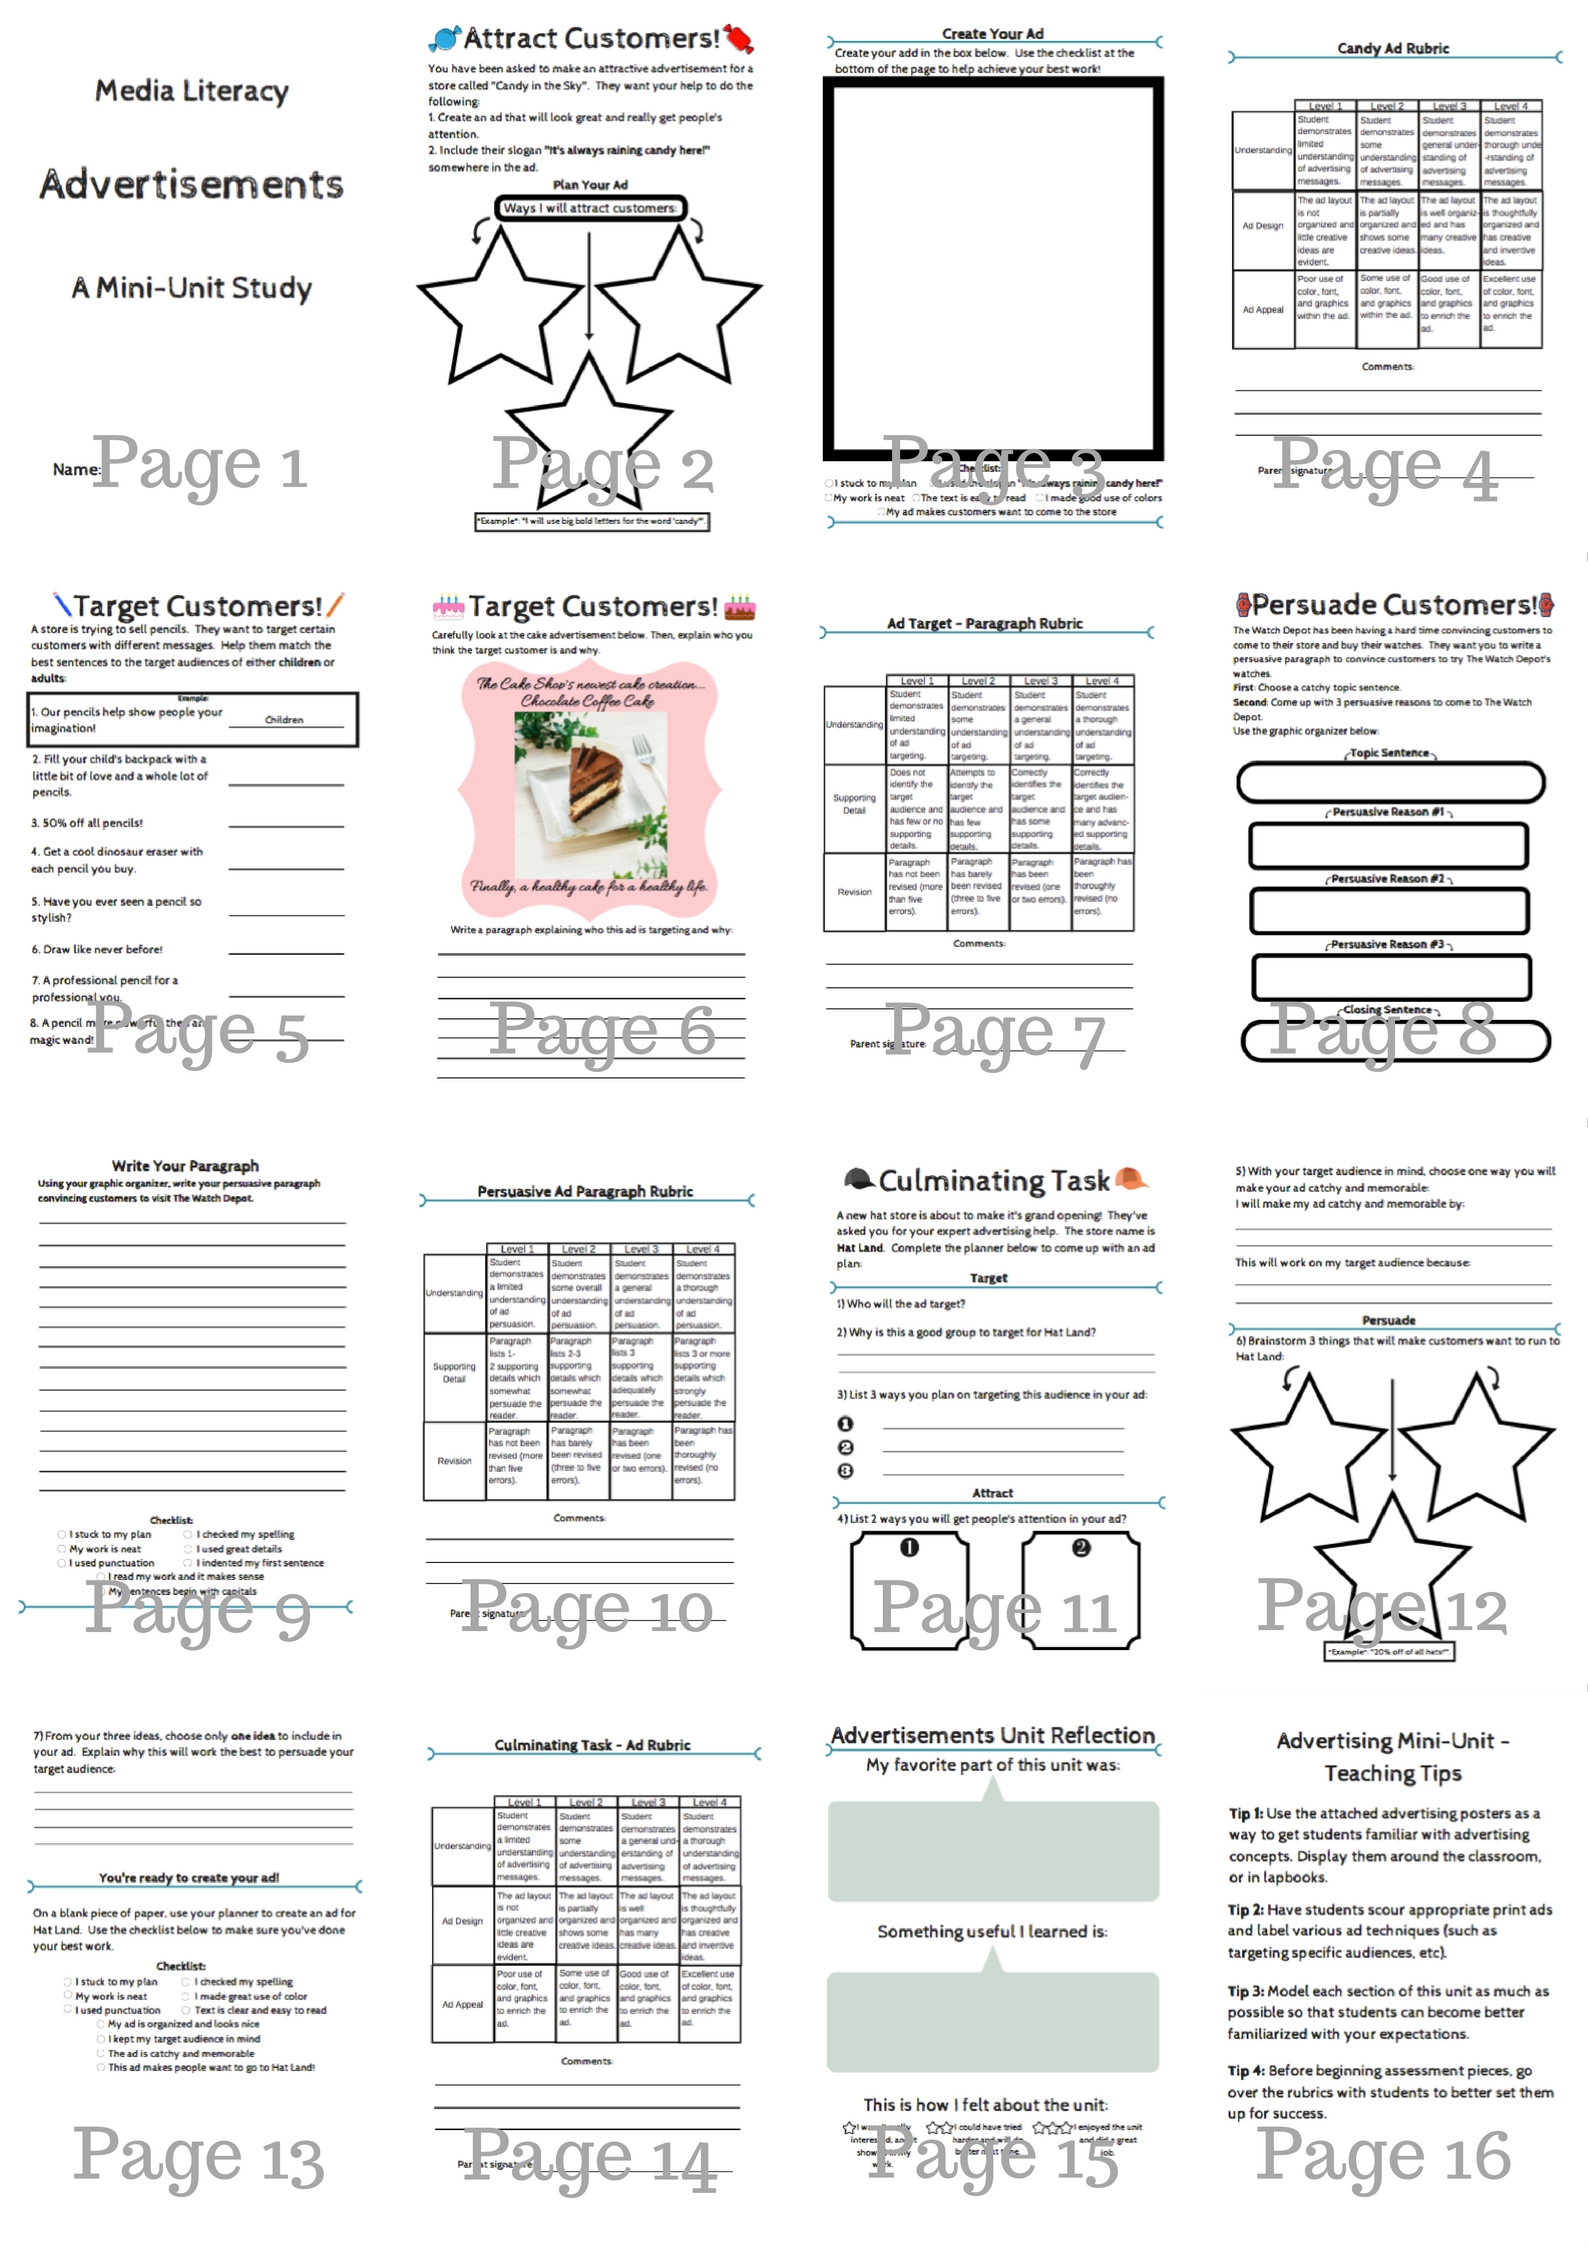 In this advertising unit, students will be asked to identify and create their own techniques in a series of wonderful activities. This unit includes graphic organizers, checklists, rubrics, teaching tips, self assessments and more. Also included is a colorful and engaging poster set about the purpose of advertisements.